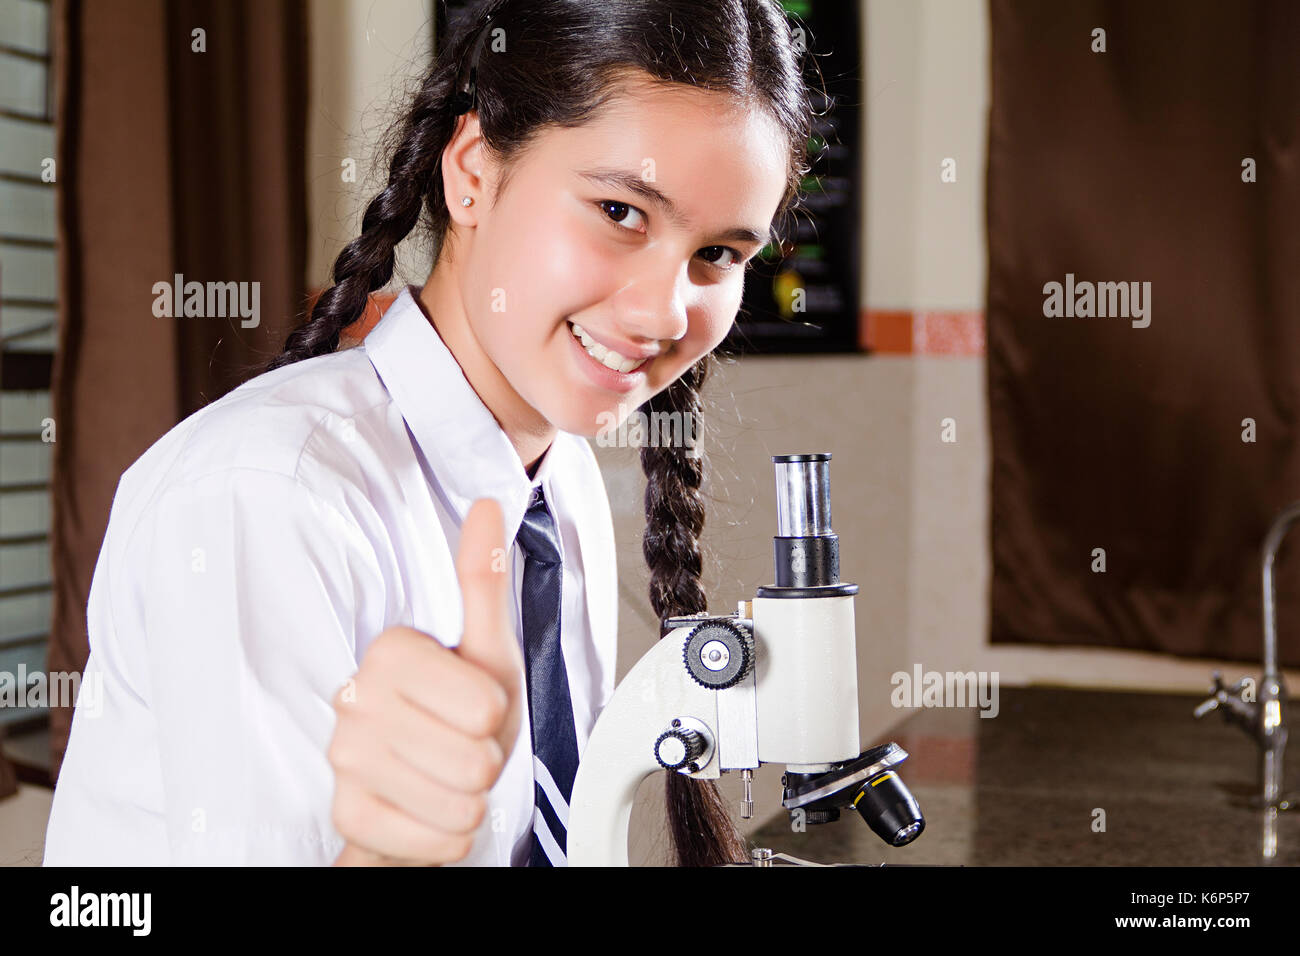 1 Indian School girl student microscope contrôle lab recherche science et showing Thumbs up Banque D'Images